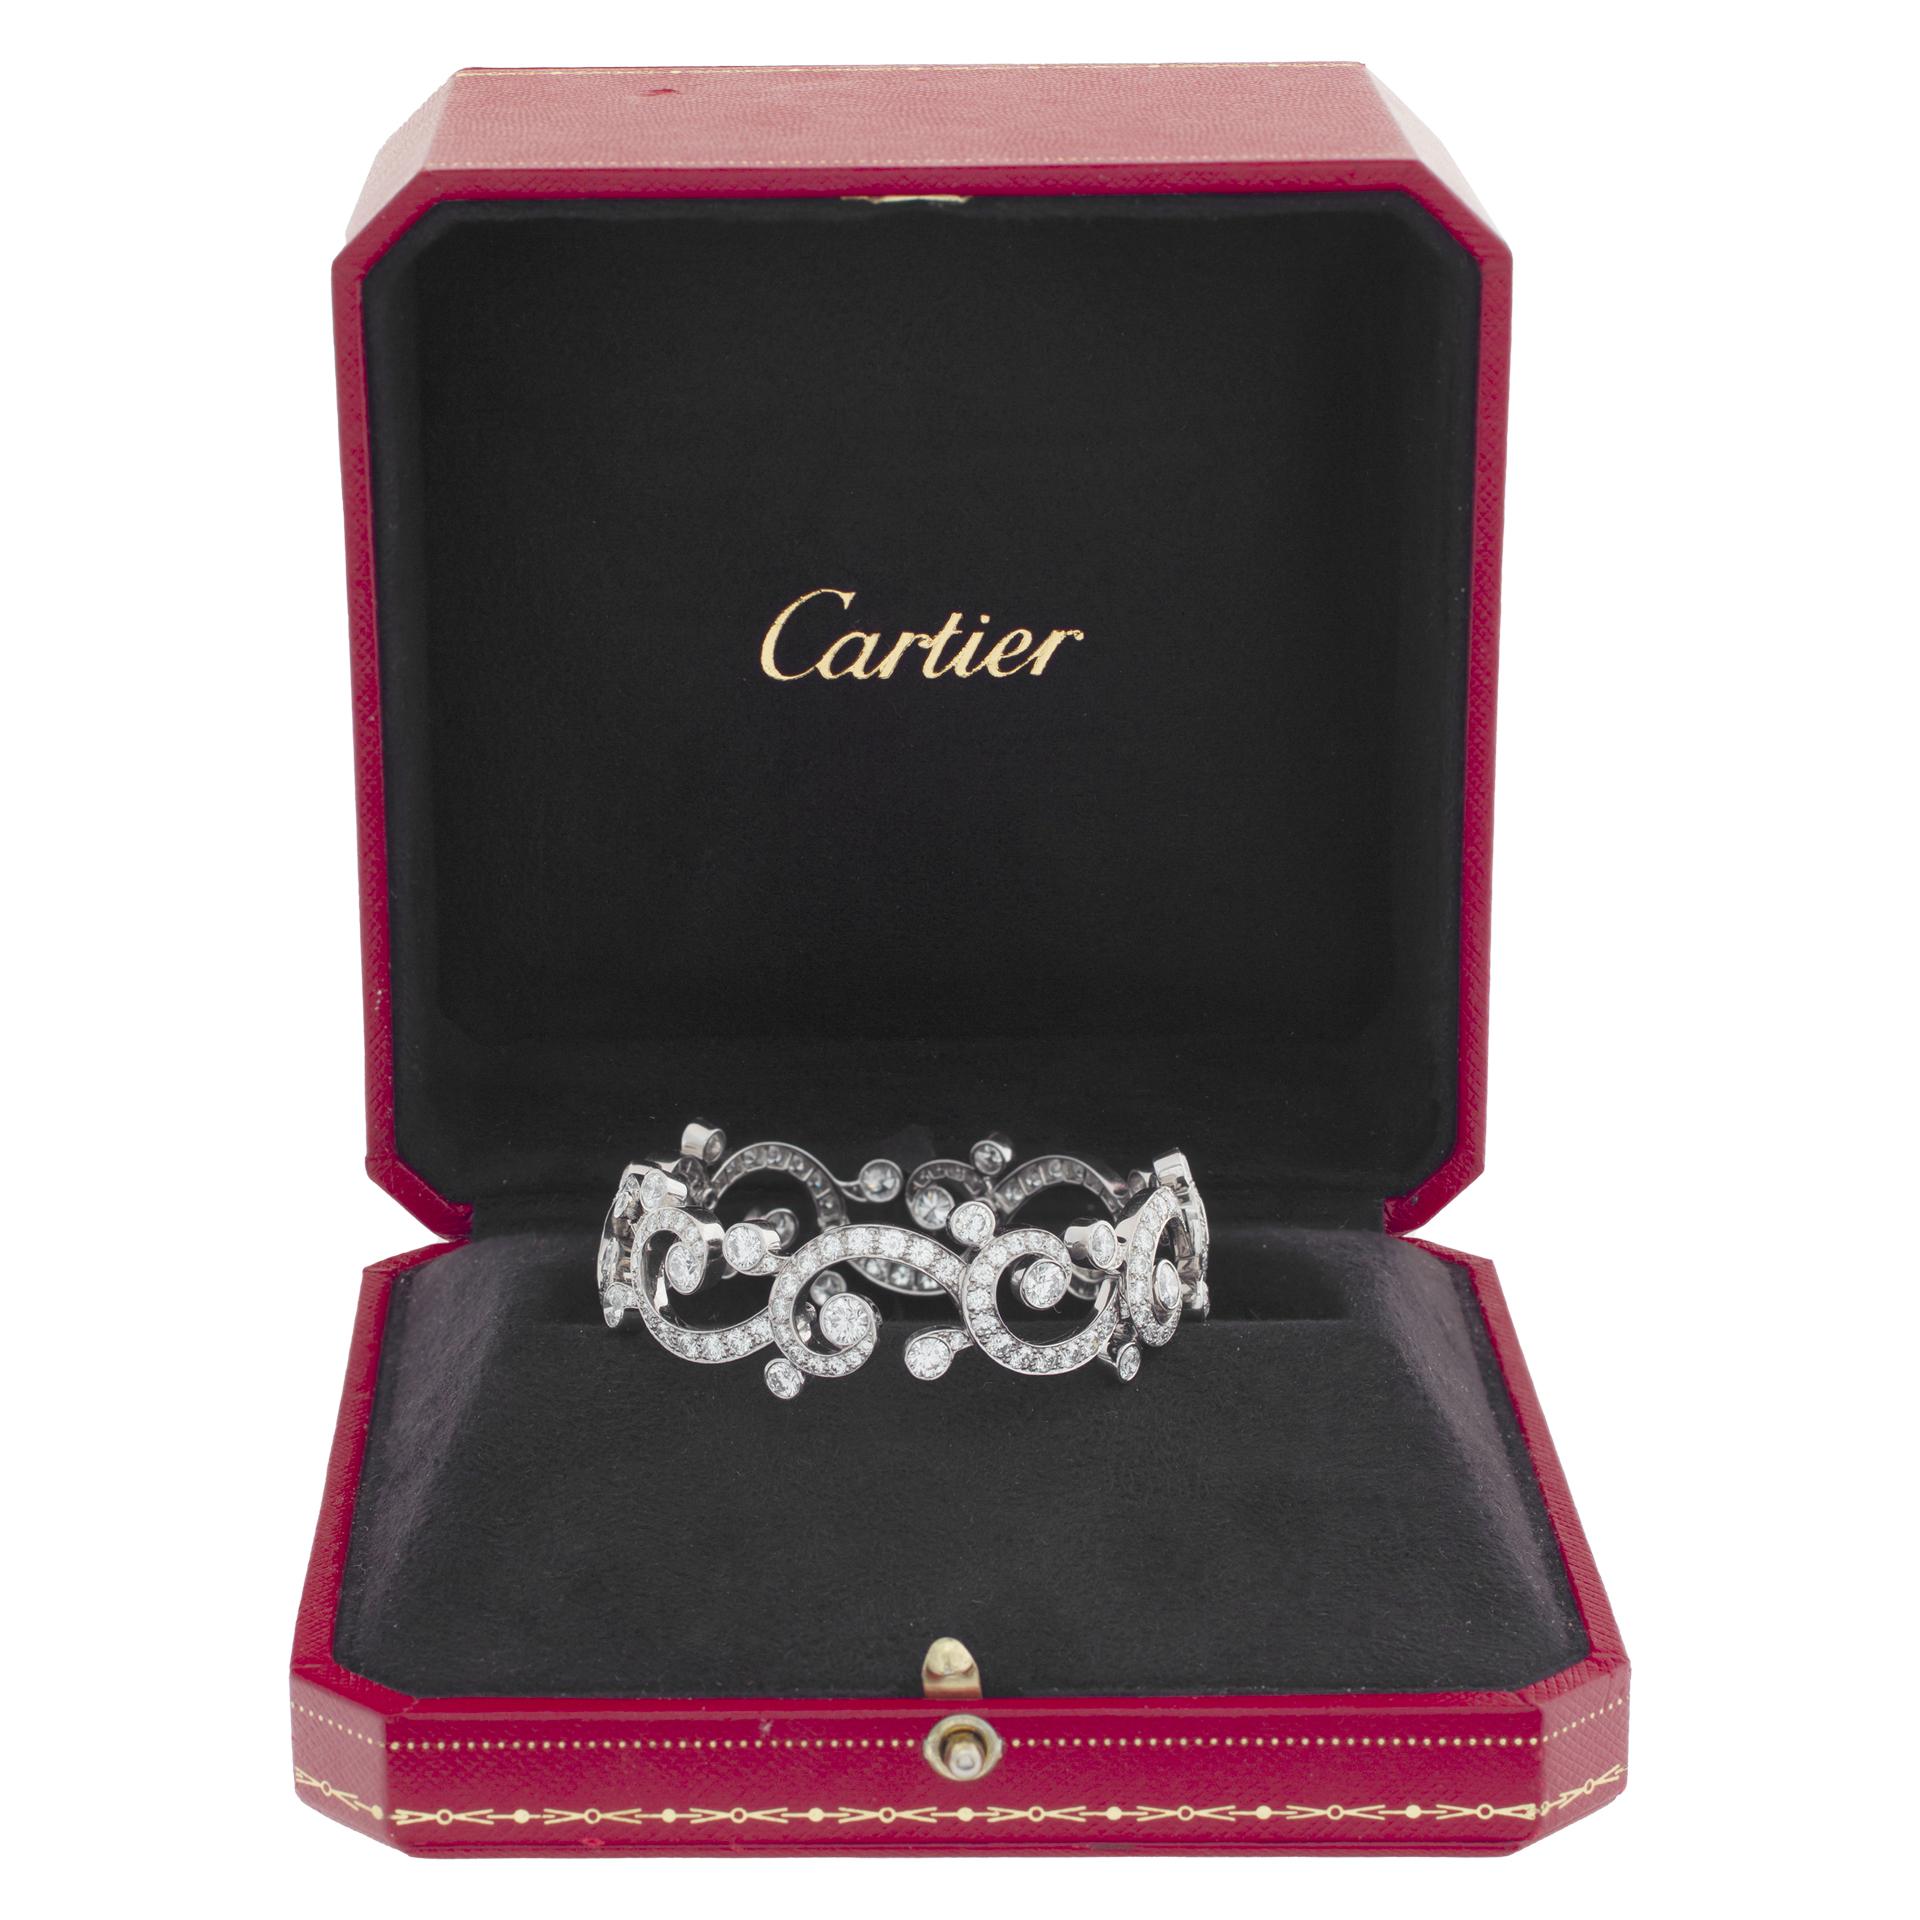 Mesmerizing Cartier diamond bangle bracelet in platinum with over 14 carats in round brilliant cut E-F color, VVS clarity diamonds. 
With Cartier Box. 
Fits wrist 6-7 inches wrist.